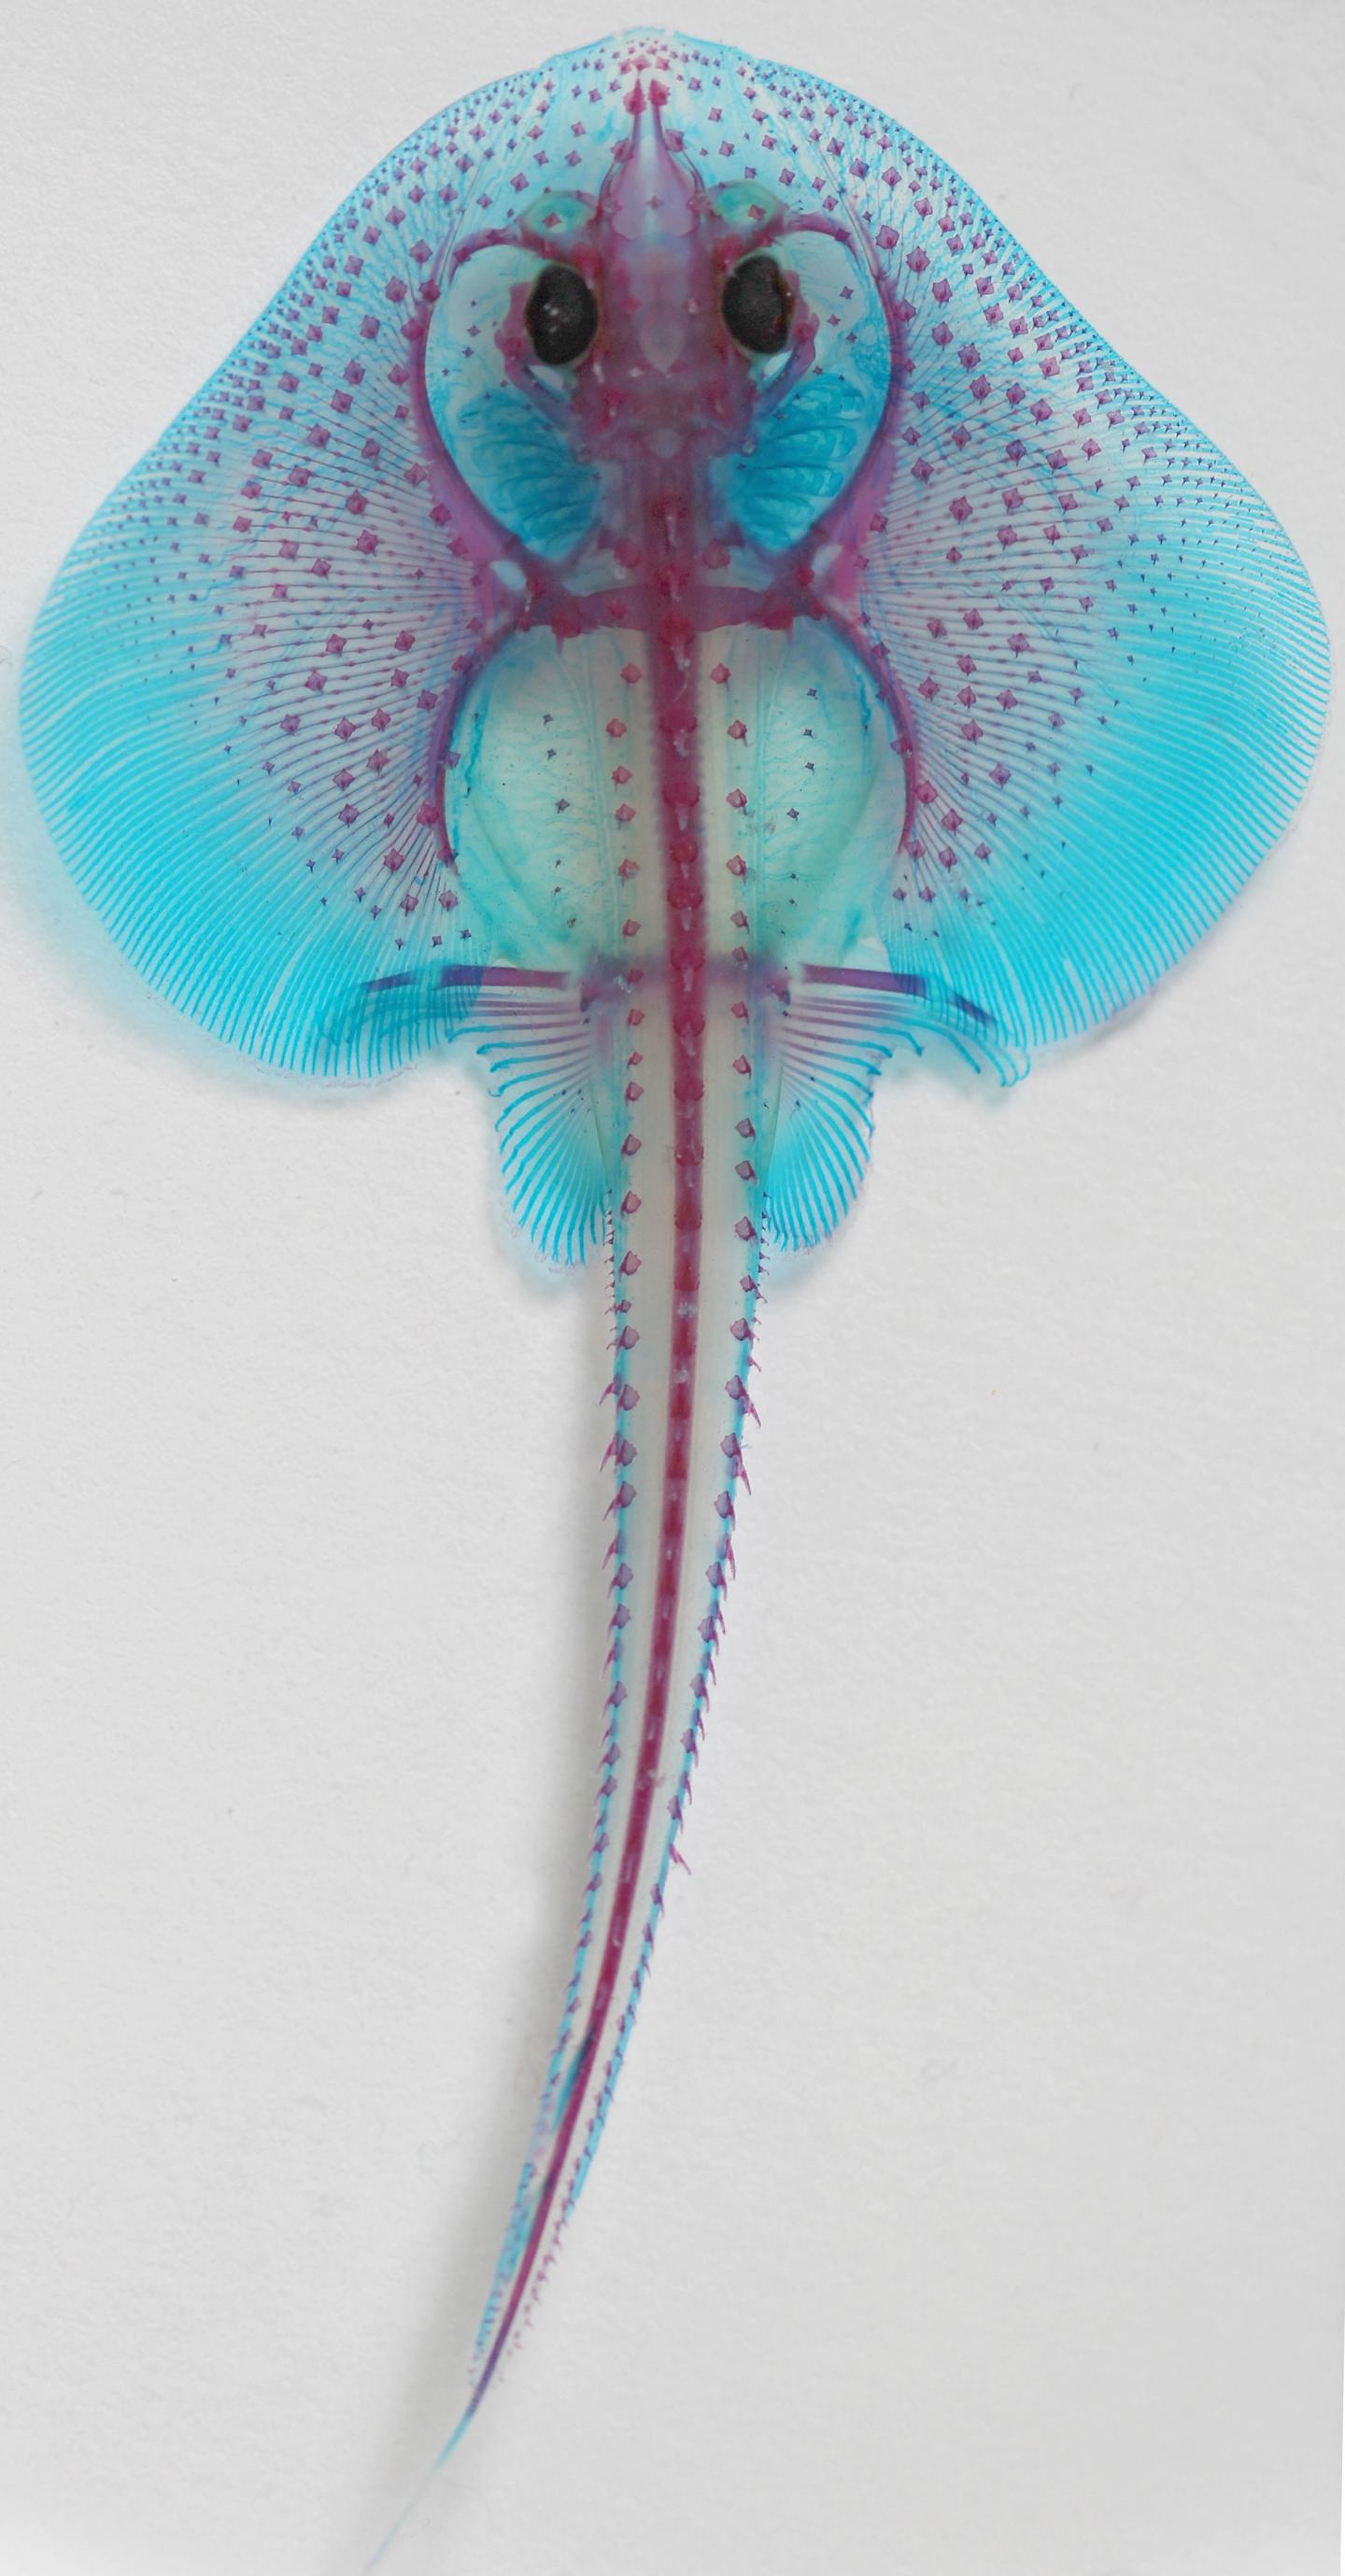 Late-Stage Skate Embryo